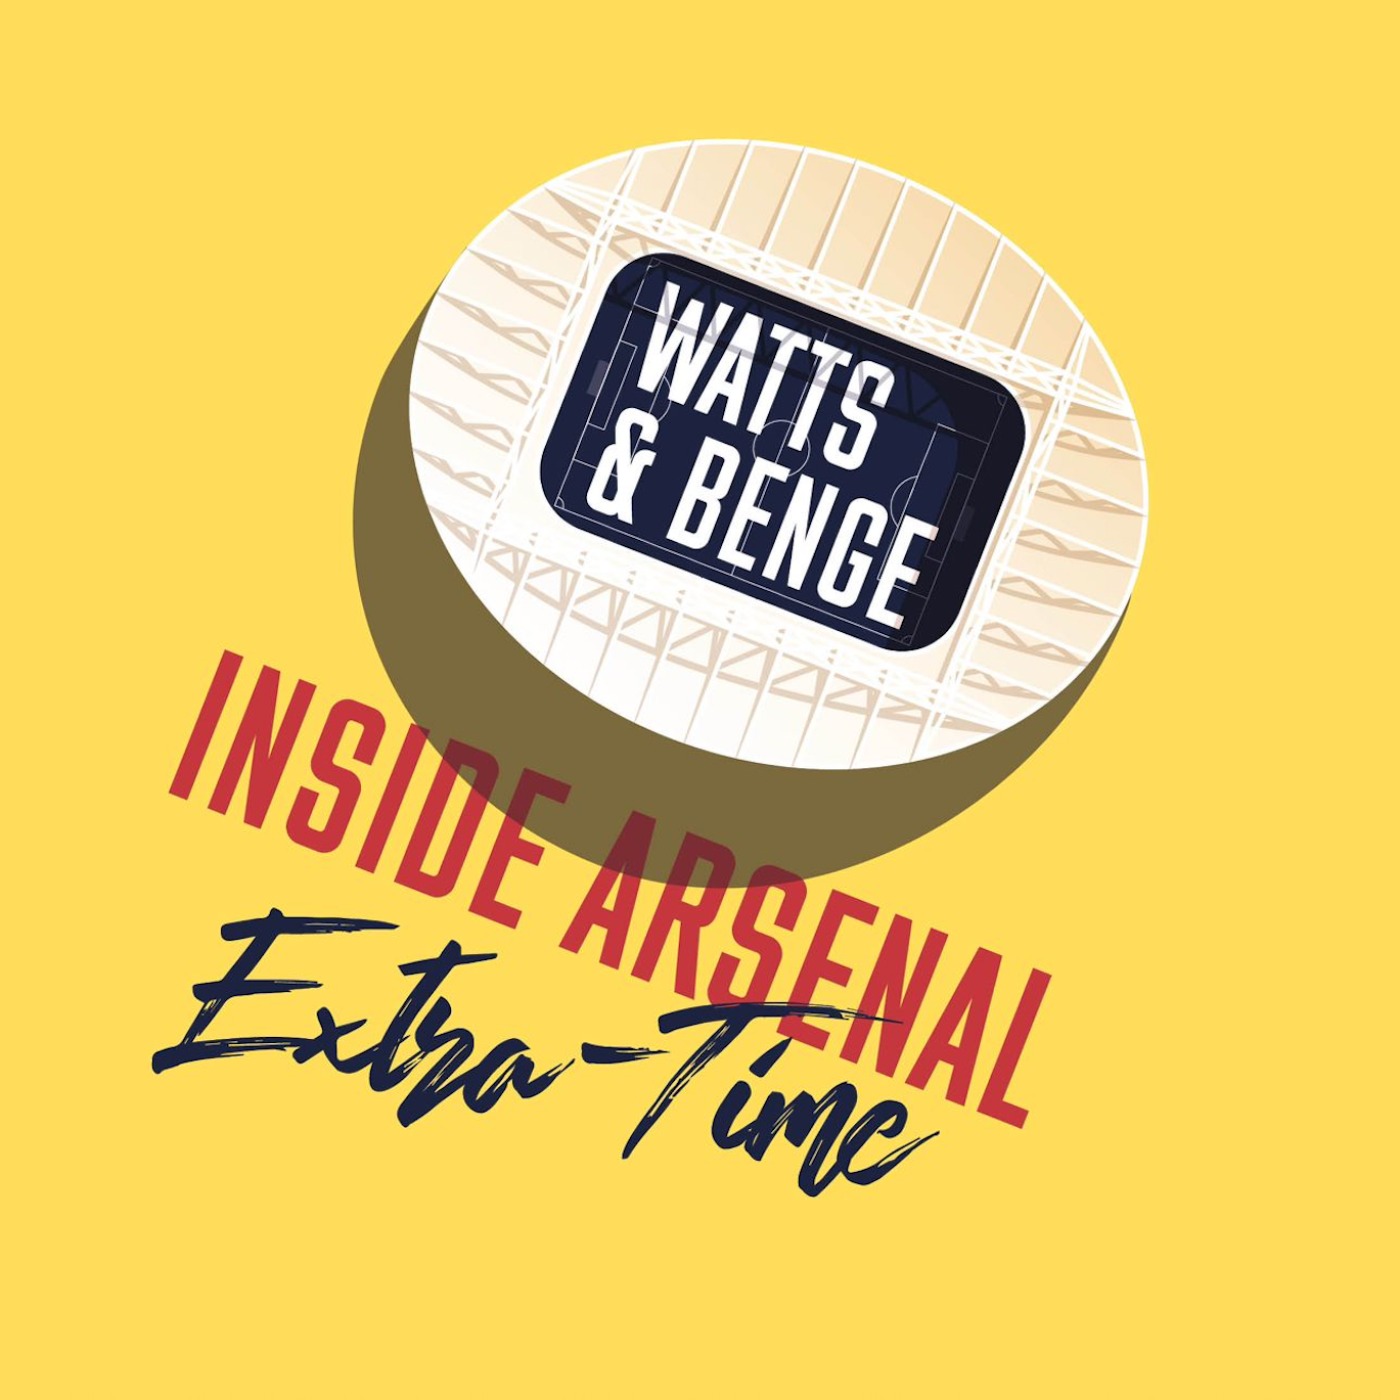 Extra-time with James Benge: Benzema links and transfer madness + Arsenal Q&A special